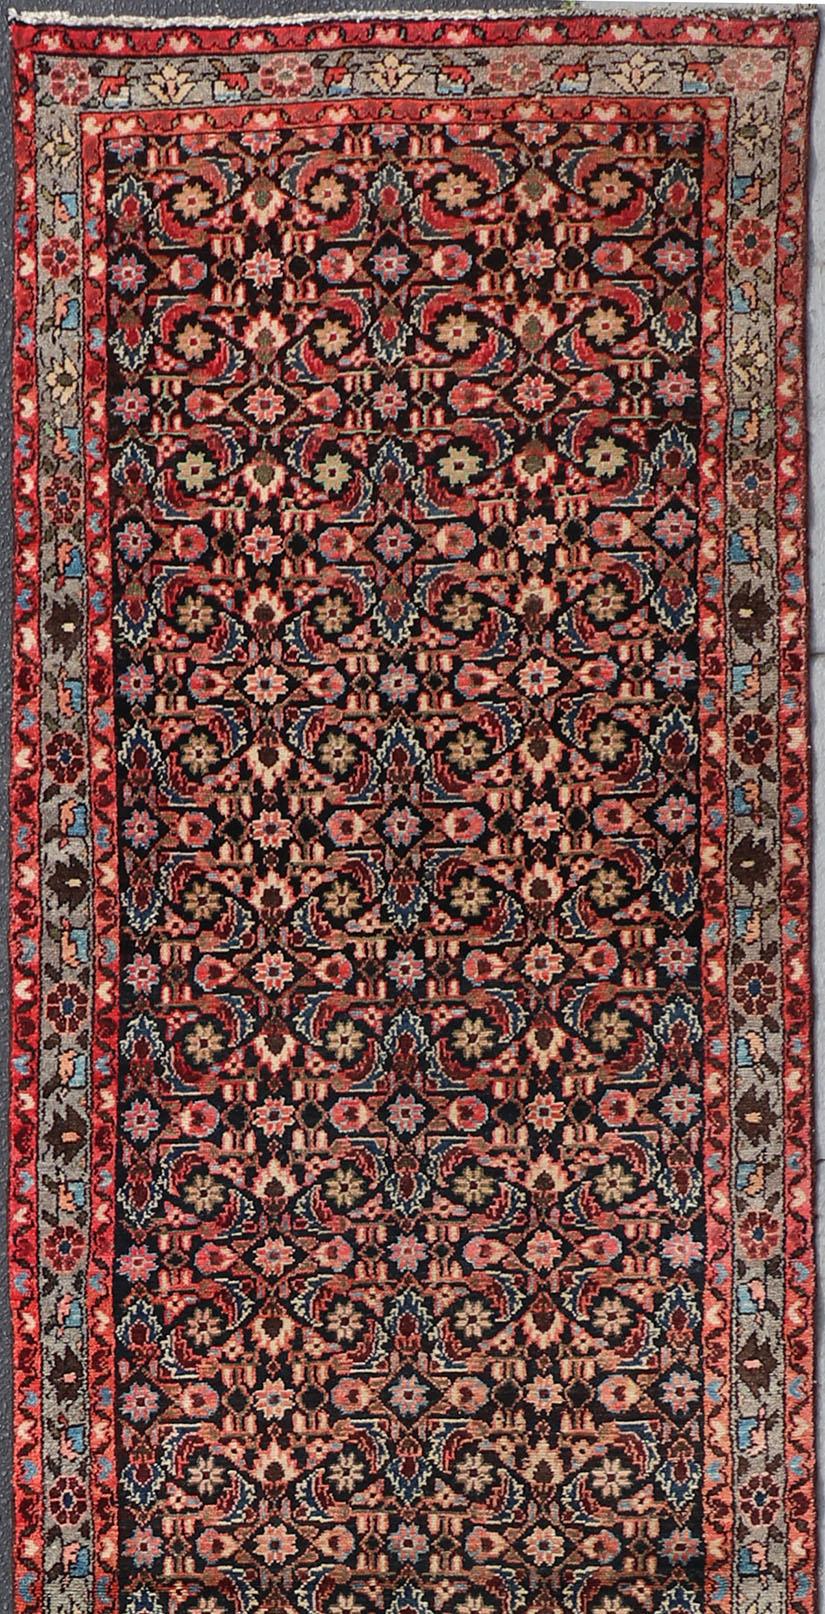 Sub-geometric Floral design Malayer runner vintage Persian in red and black, rug H-501-4, country of origin / type: Iran / Malayer, circa 1950.

This magnificent vintage Persian Malayer runner (circa 1950) bears a beautiful, expansive, all-over